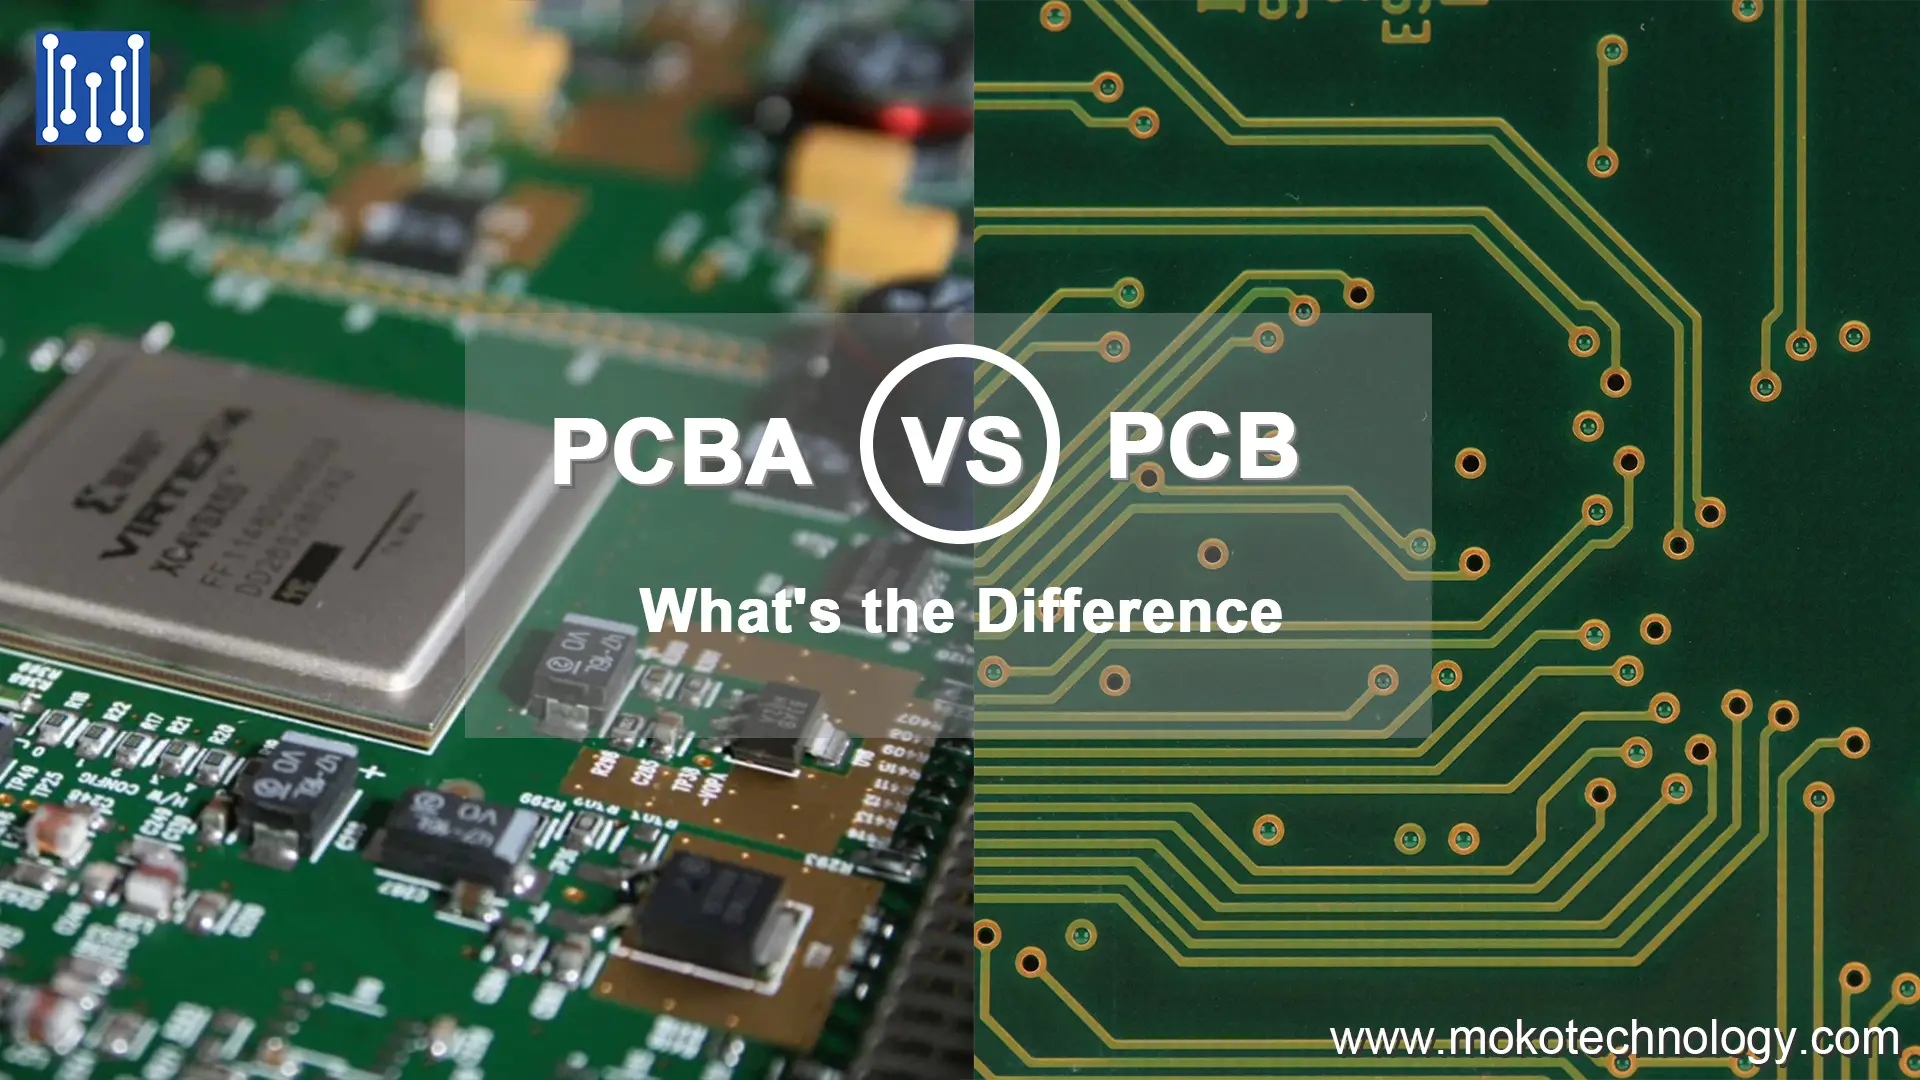 PCB vs PCBA: What’s the Difference